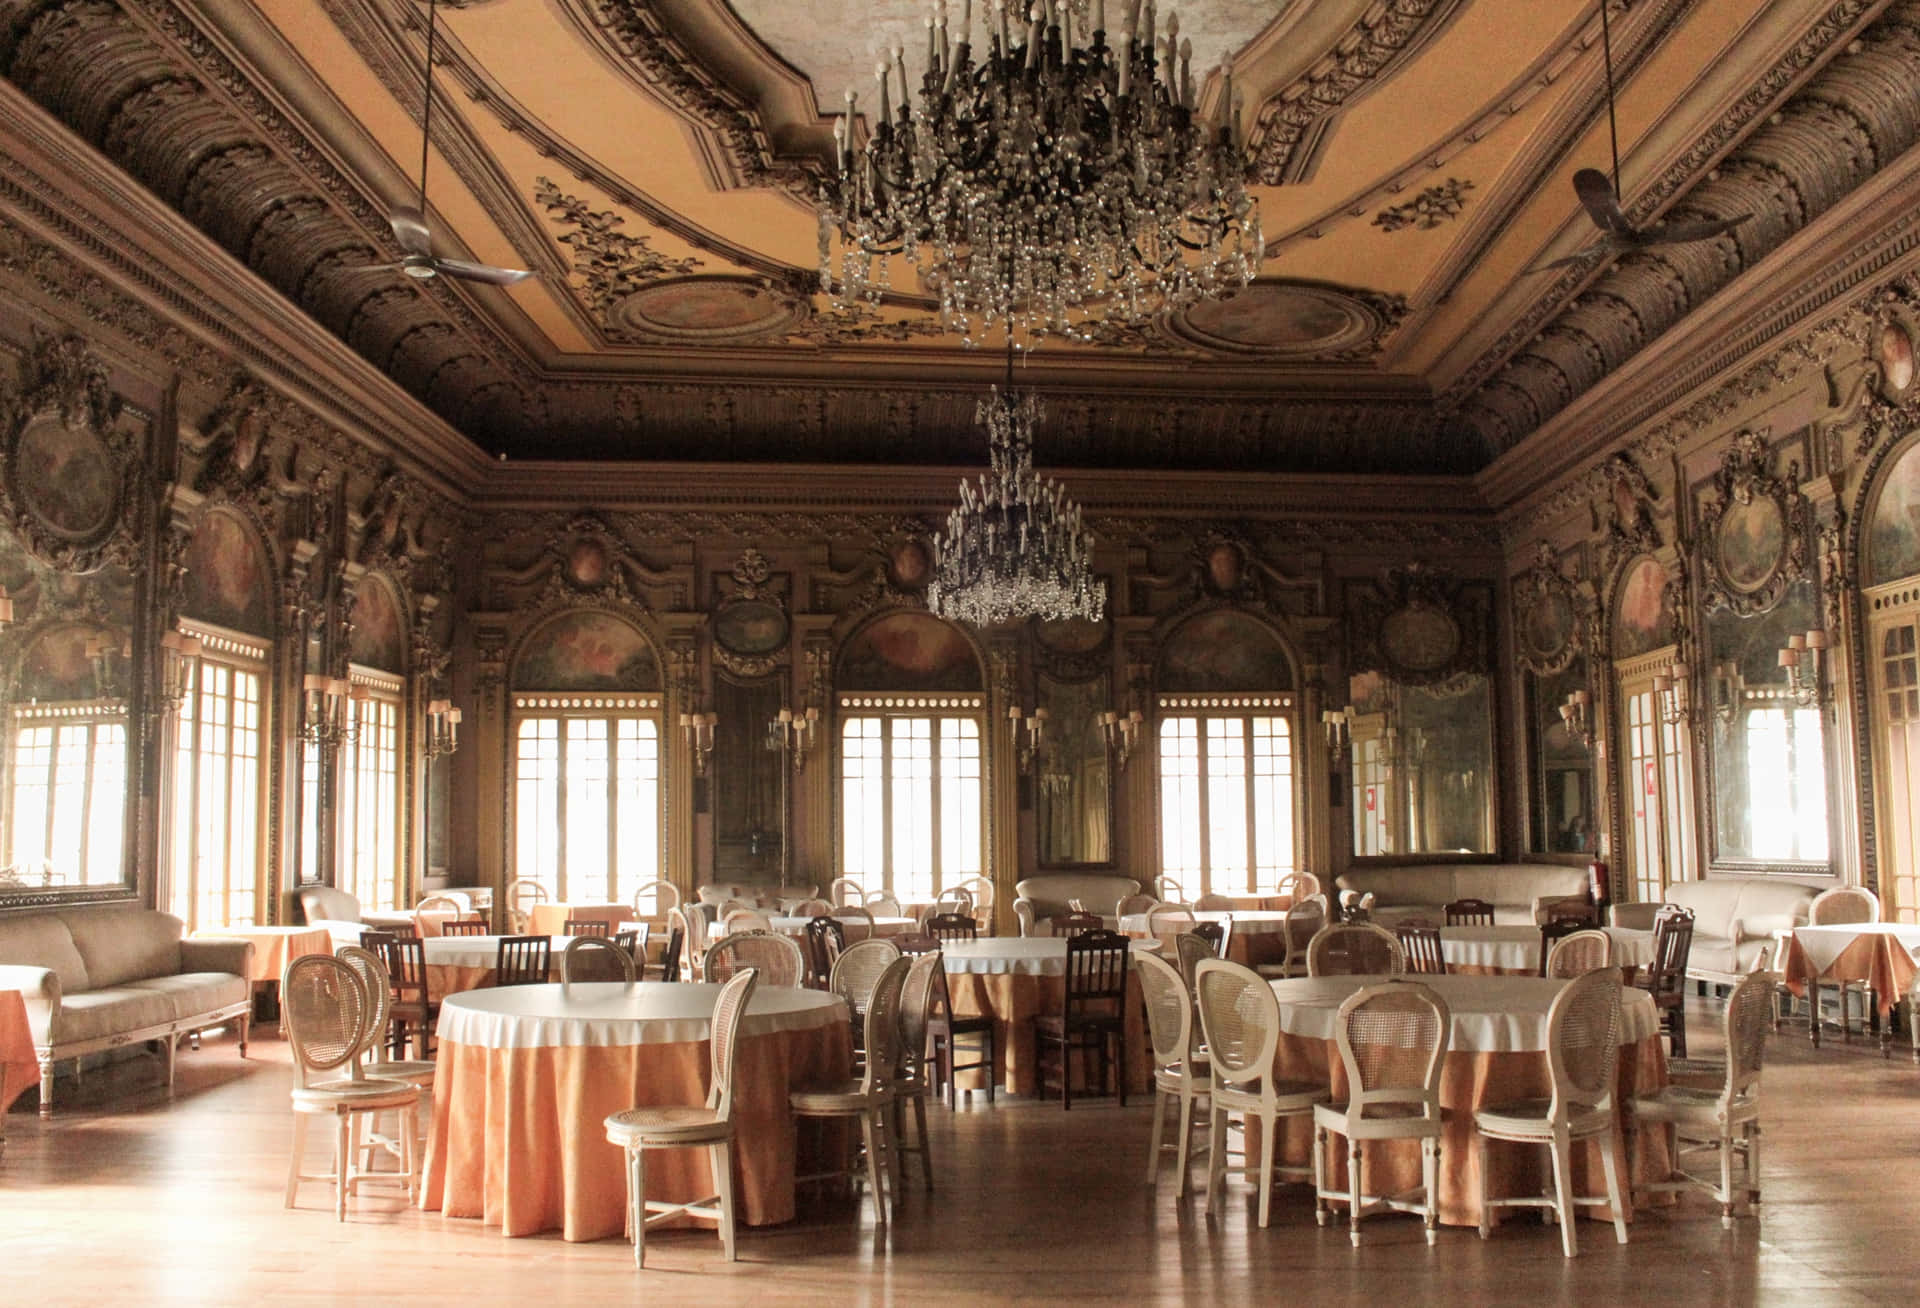 Captivating Ballroom With a Dramatic Feel